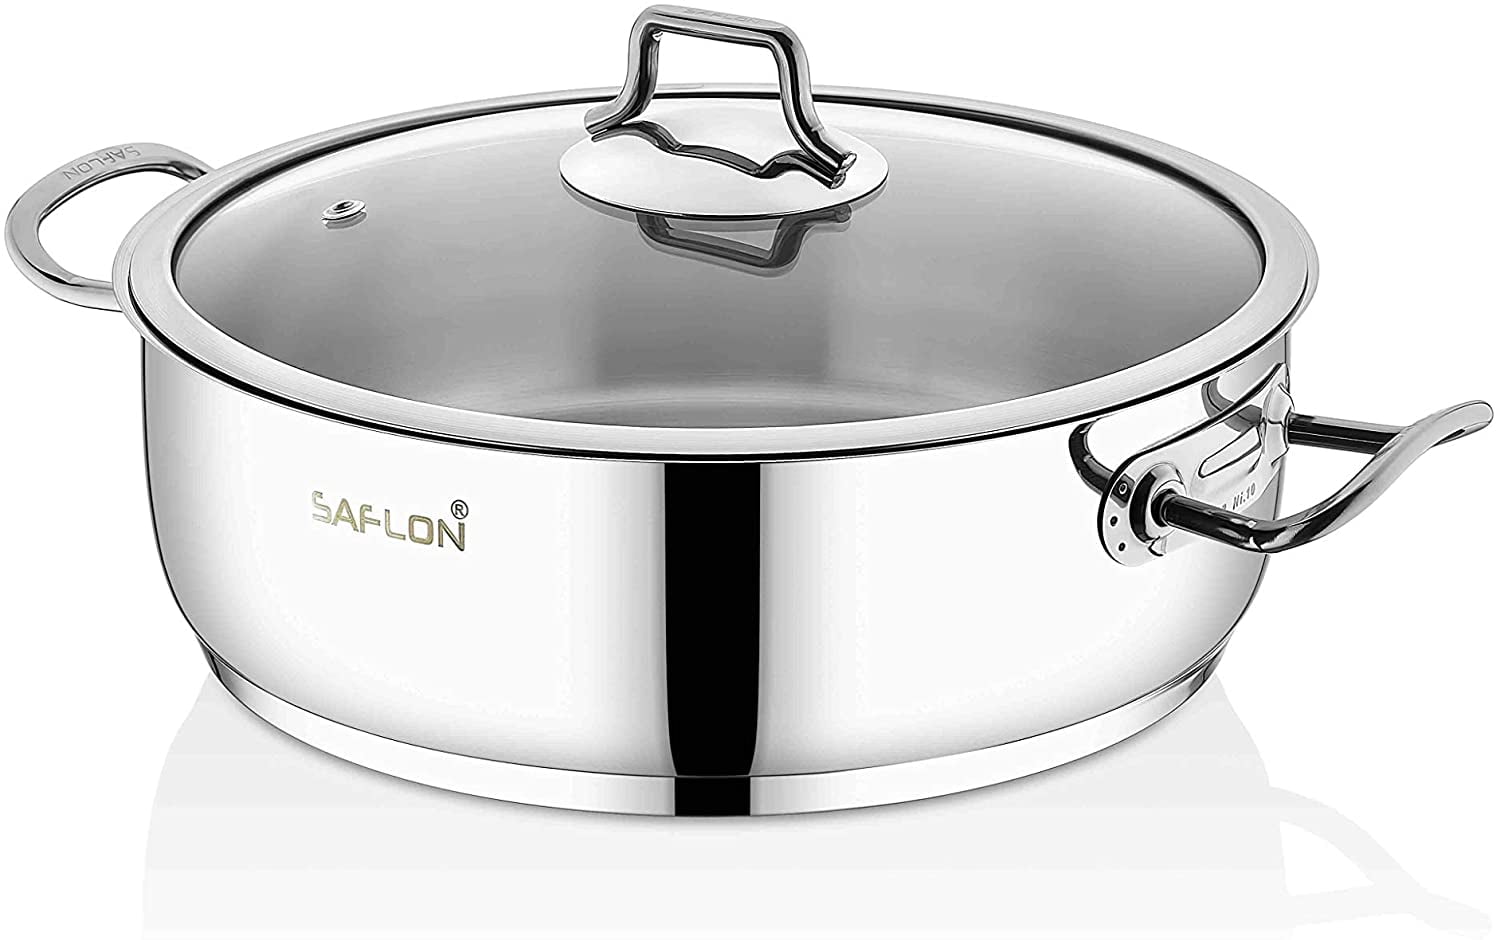 Oven and Dishwasher Safe Saflon Stainless Steel Tri-Ply Capsulated Bottom 4 Quart Saute Pot with Glass Lid Induction Ready 